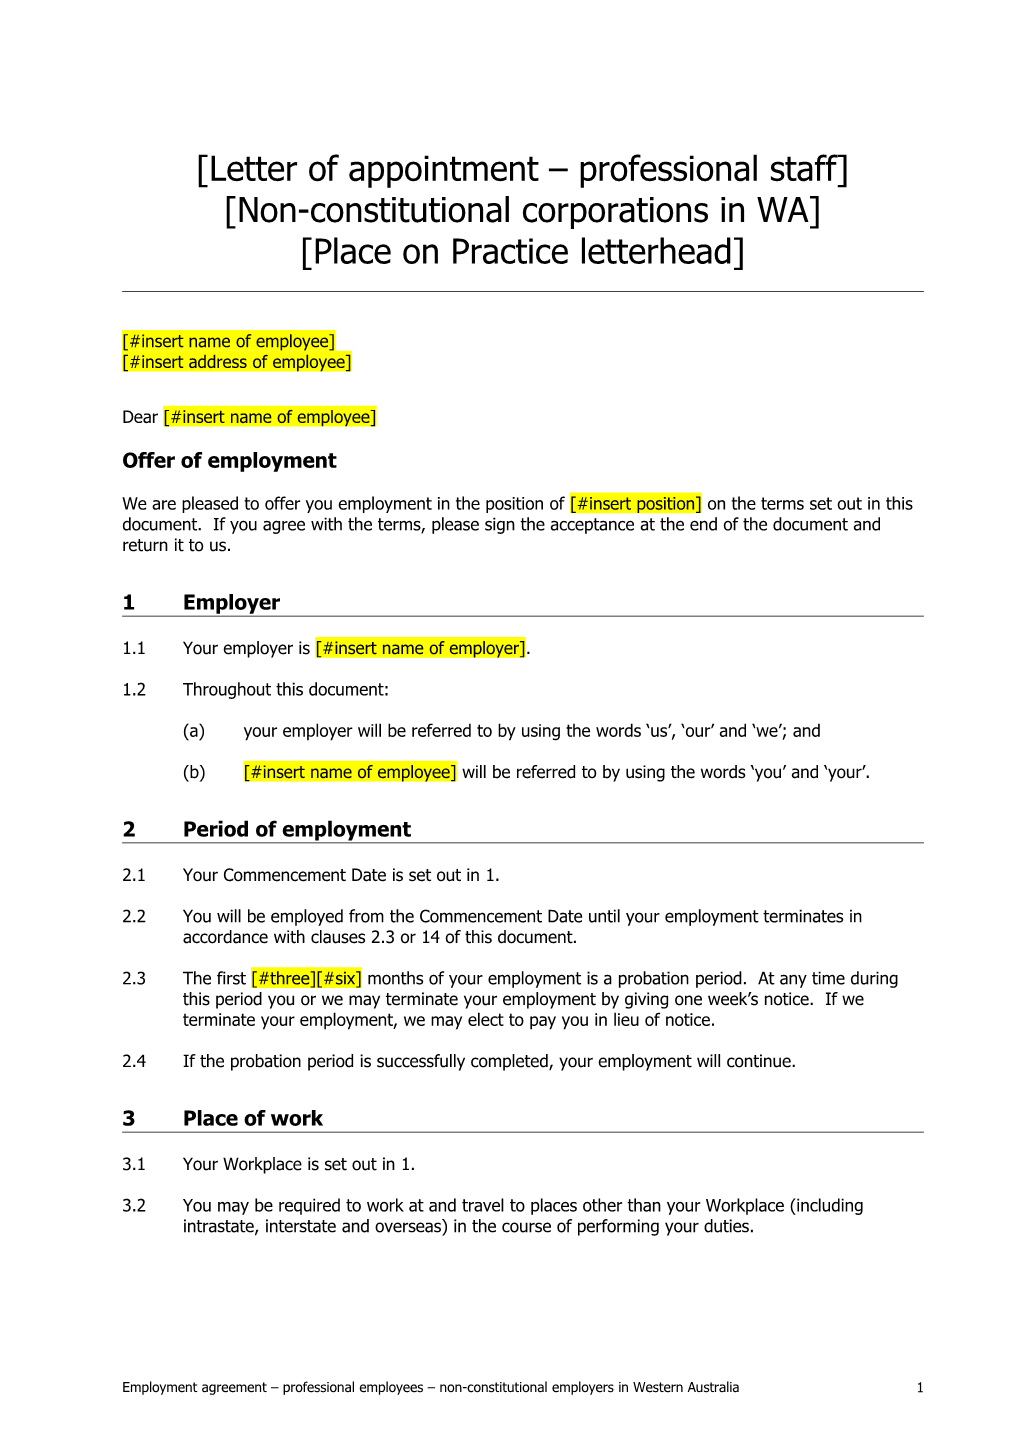 Letter of Appointment Professional Staff - WA